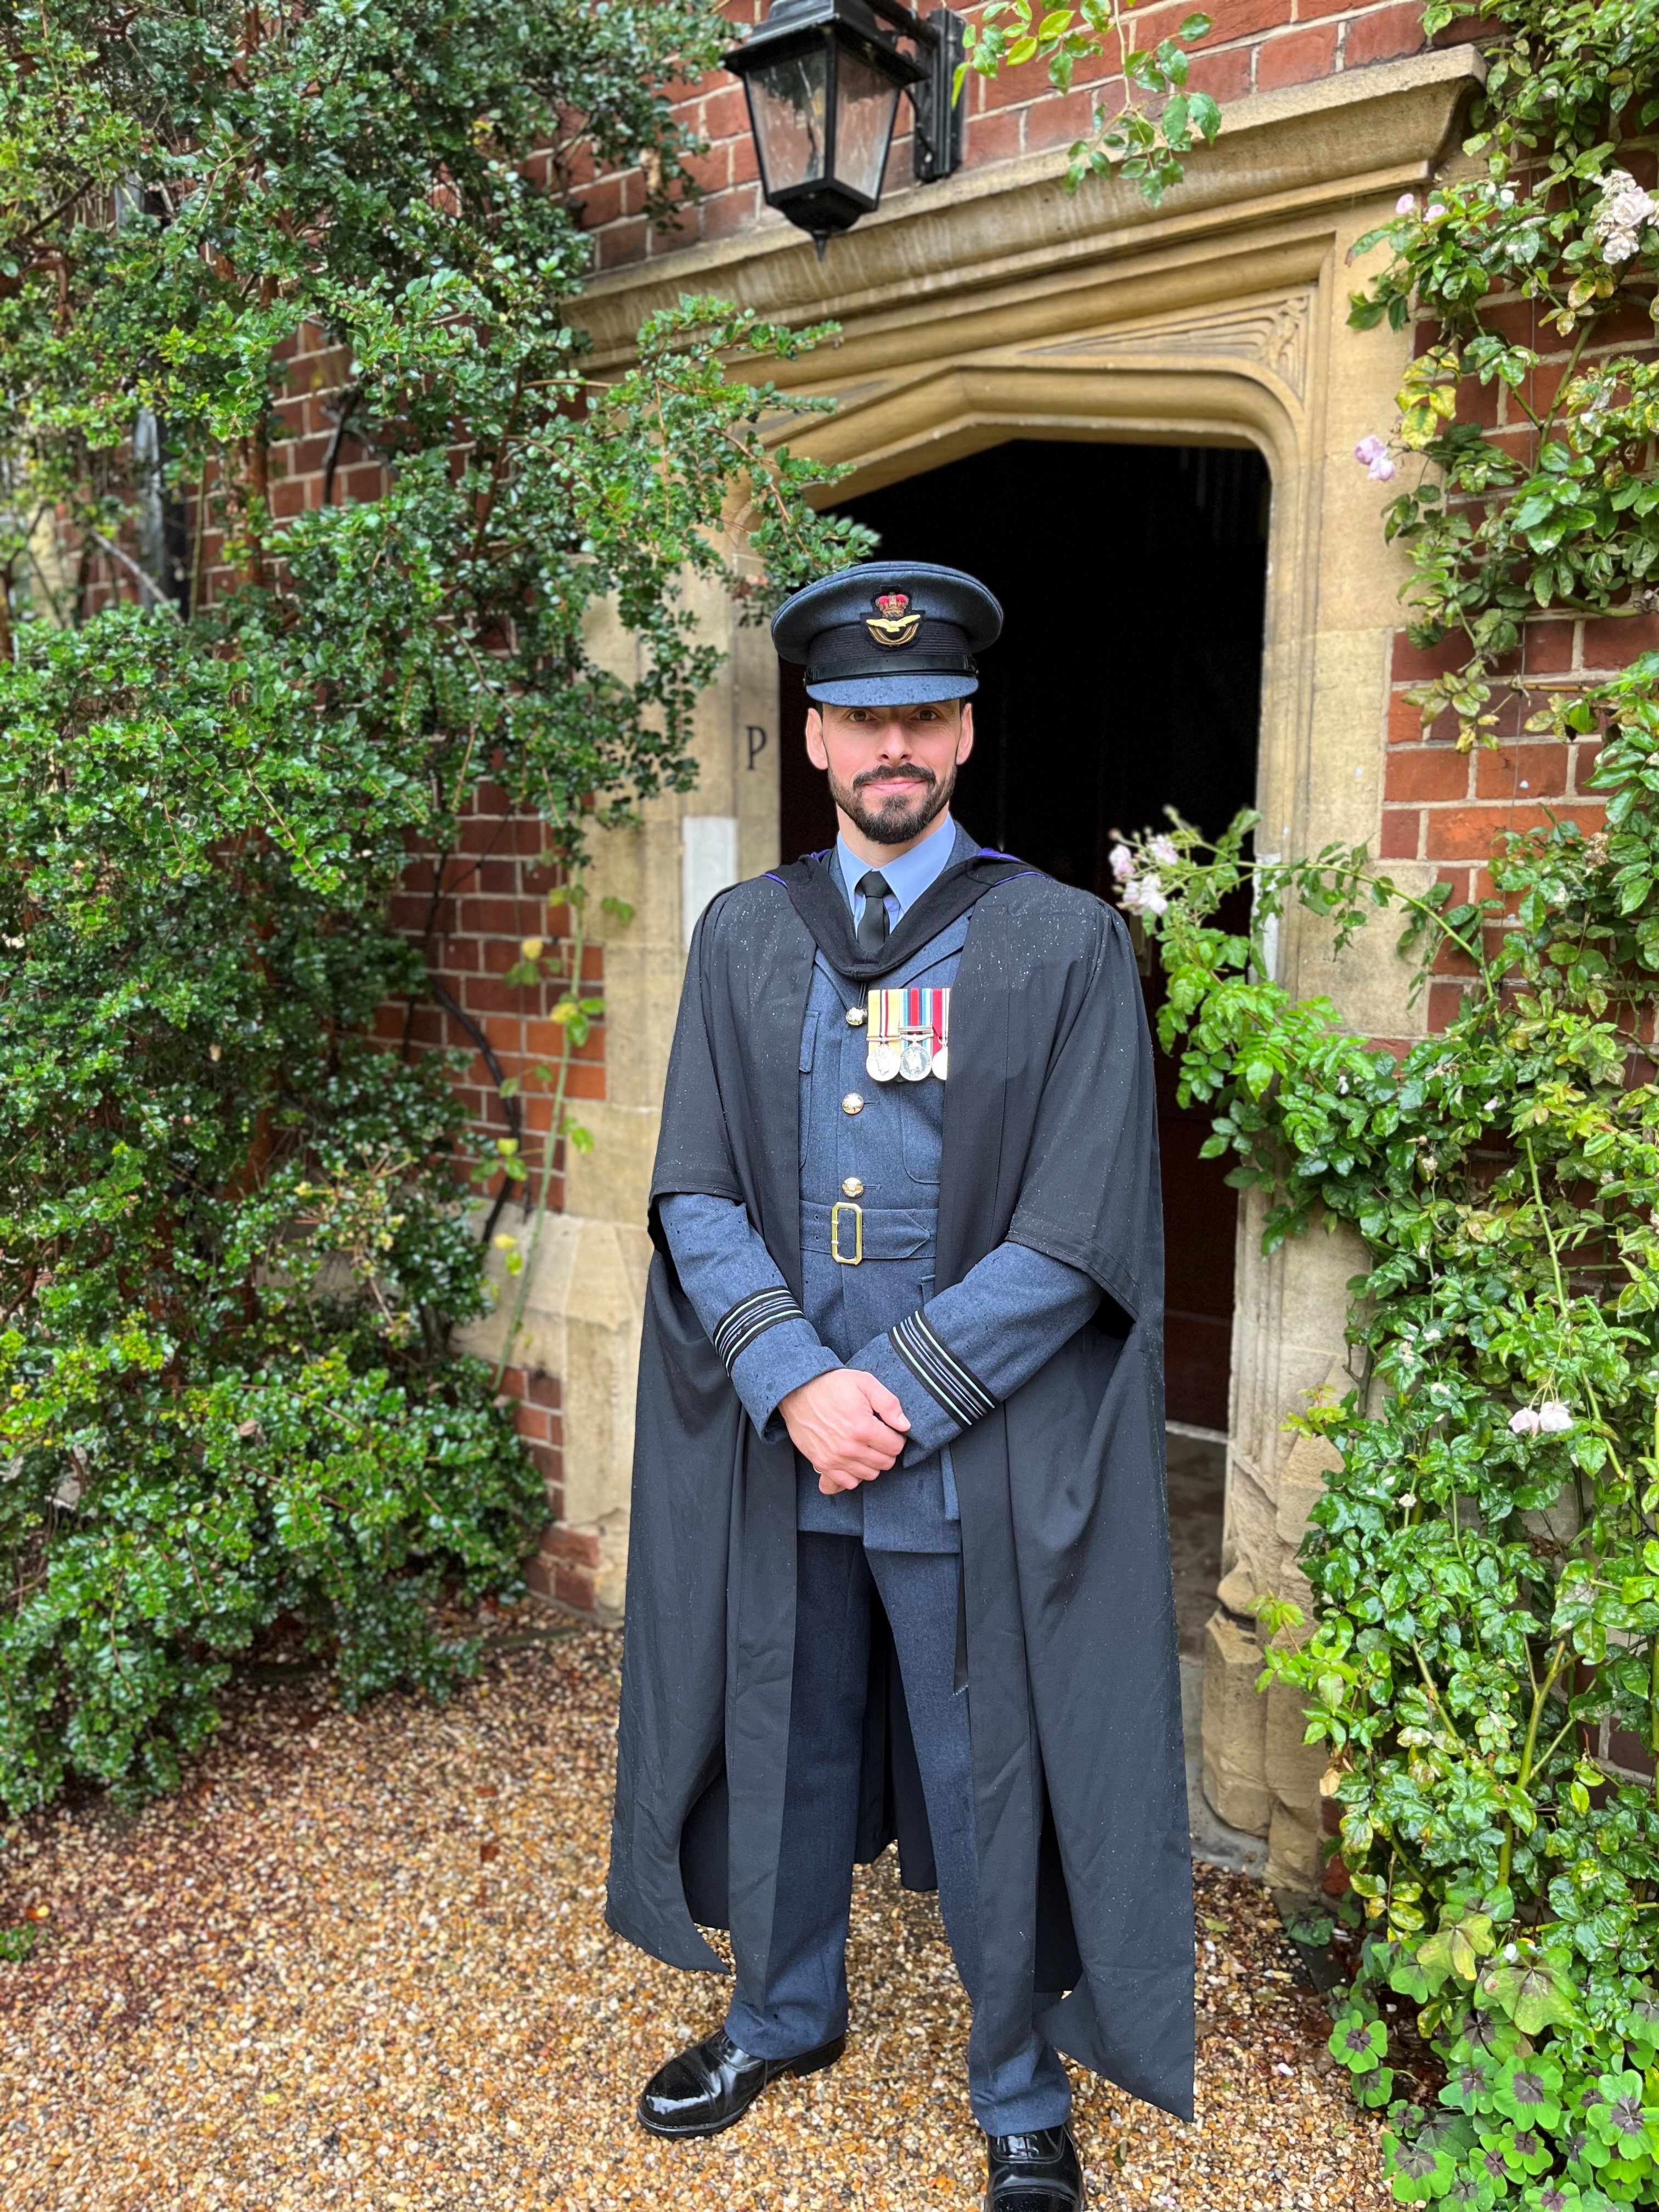 Squadron Leader Handley dressed in his cap and gown over his RAF uniform for graduation